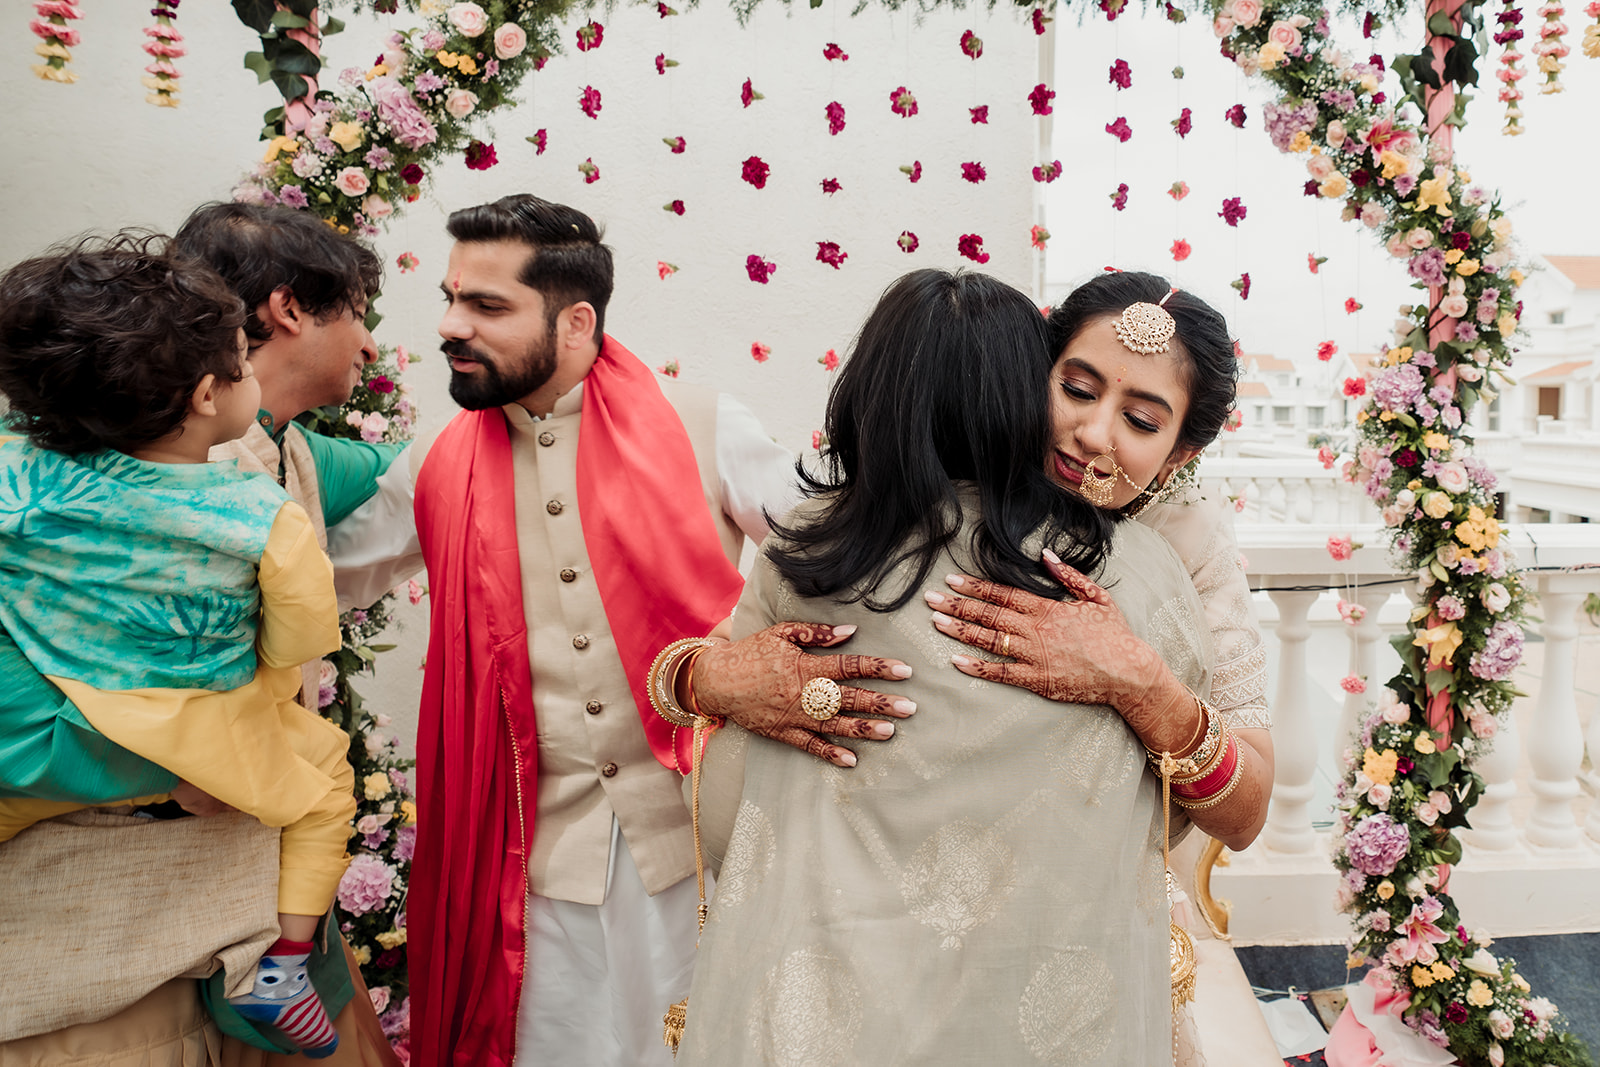 Sibling embrace: A heartwarming moment as the bride shares a warm hug with her beloved siblings.